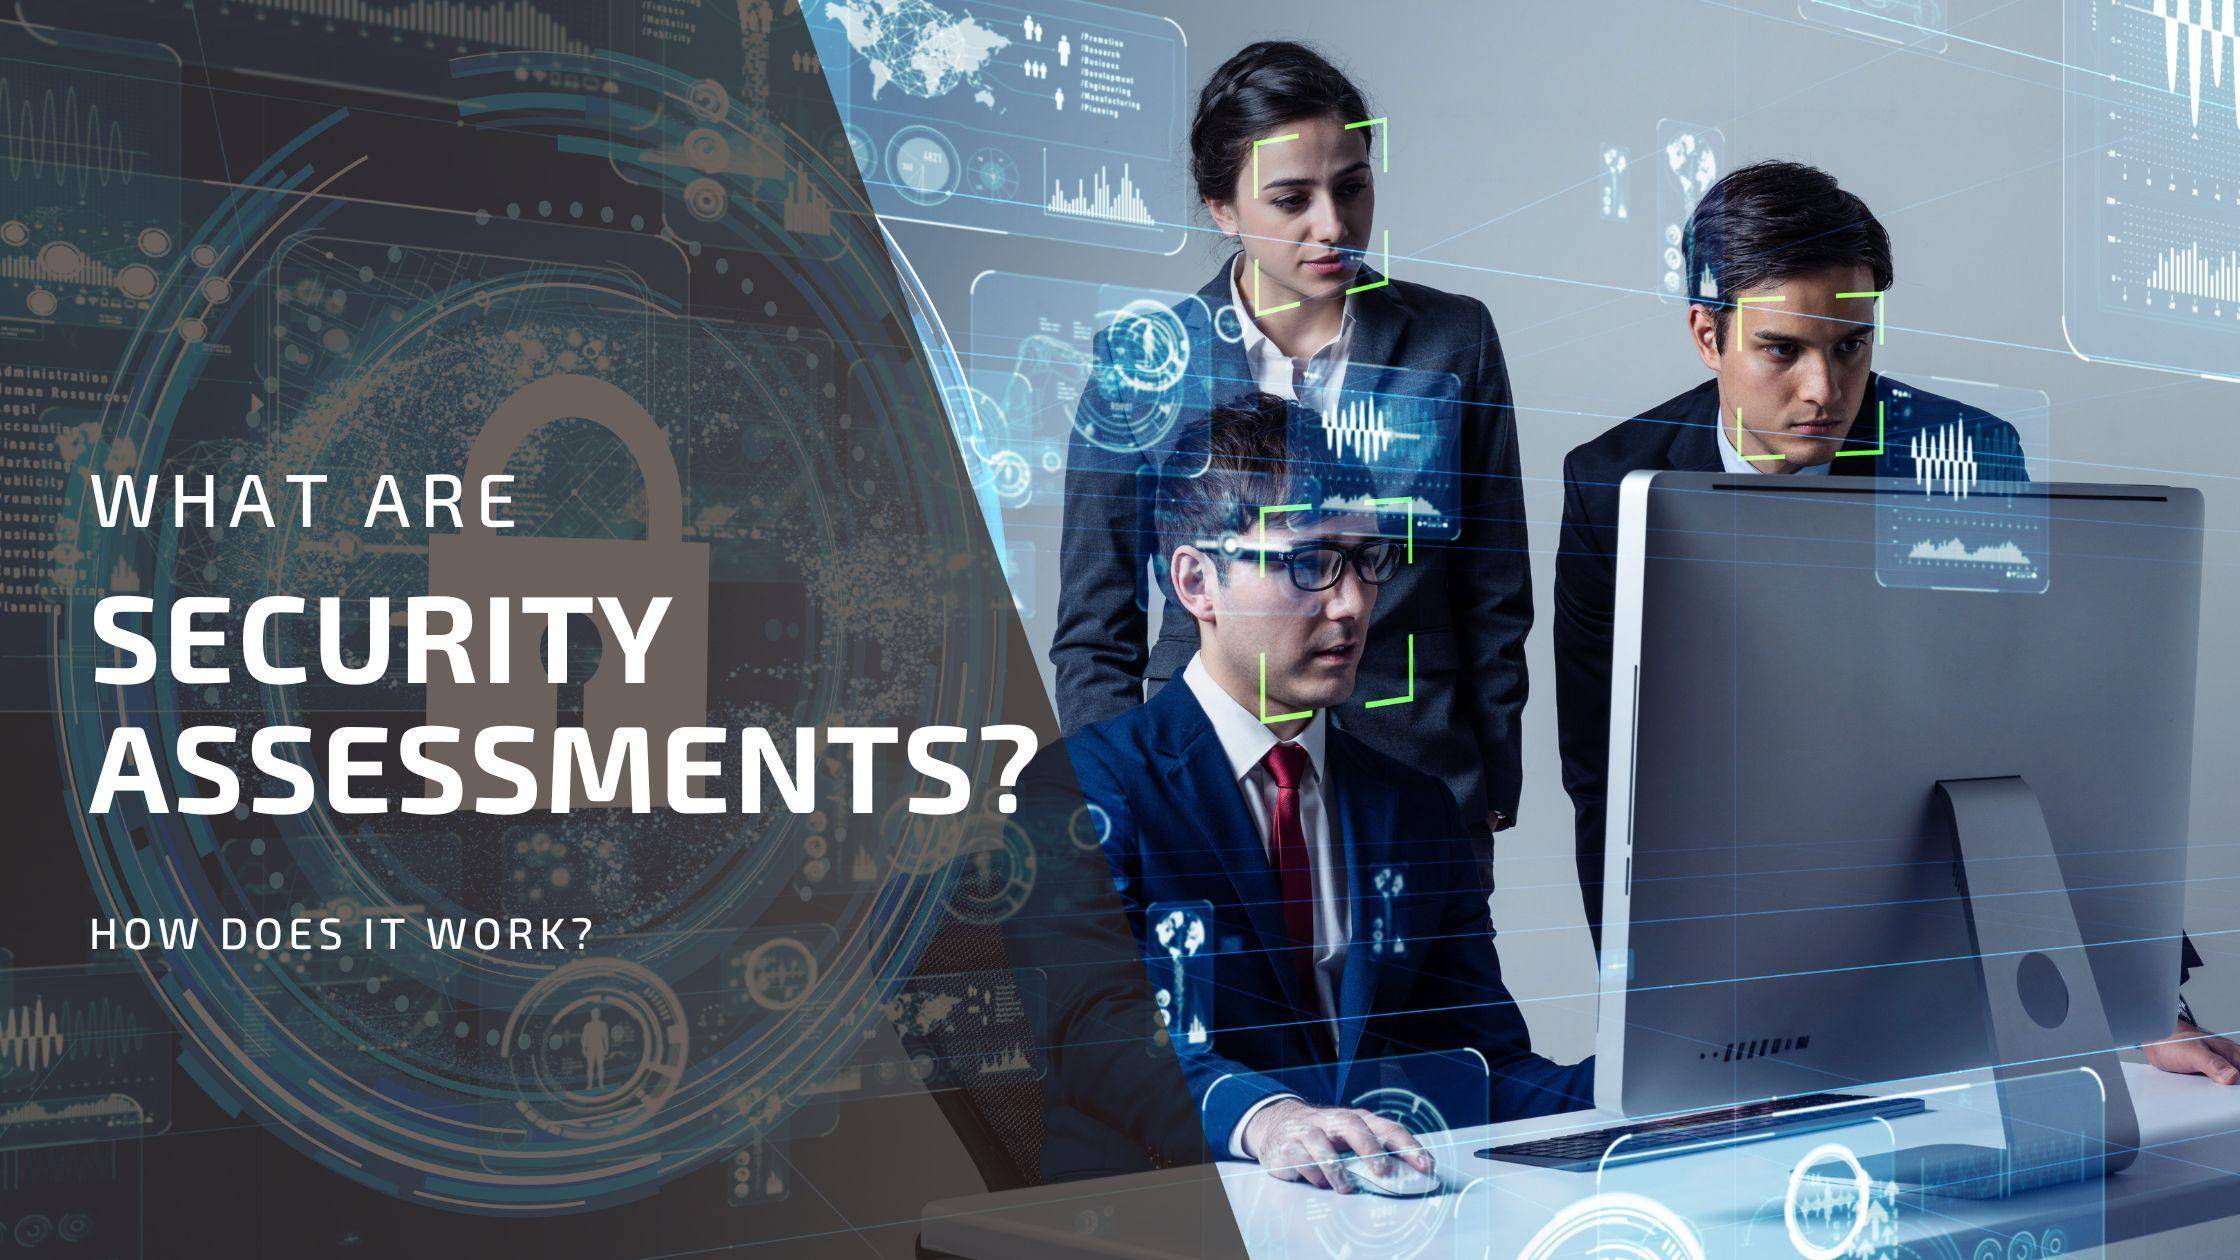 What Is Security Assessment? How Does It Work?